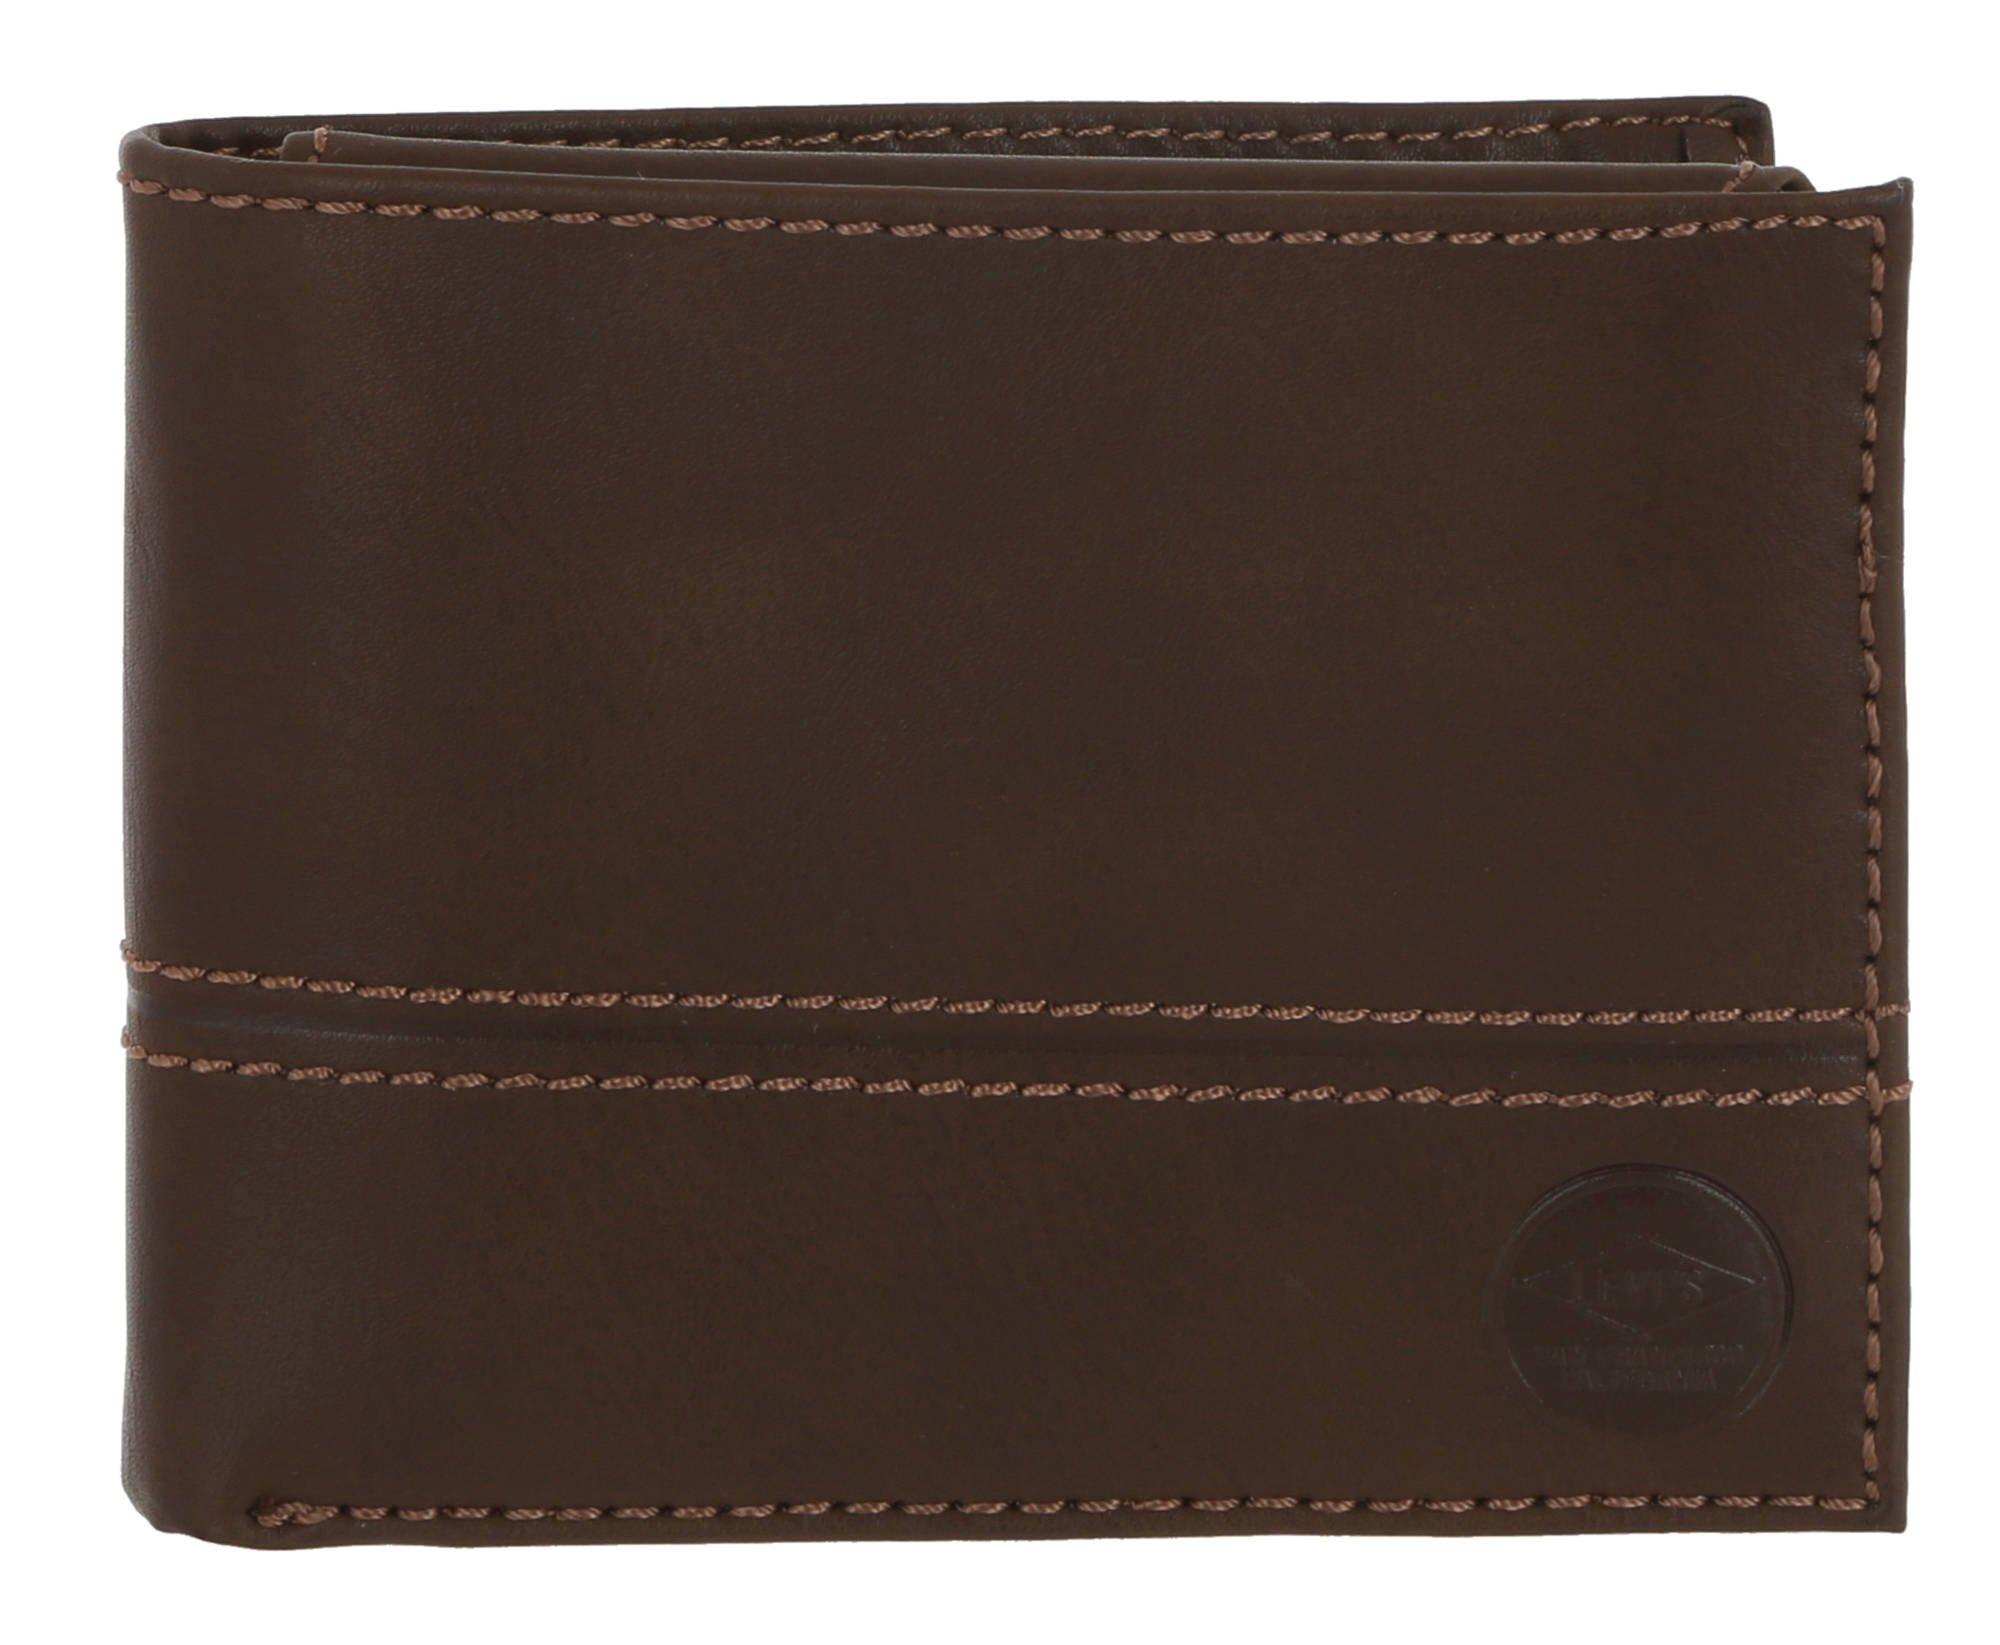 Solid Faux Leather Trifold Wallet